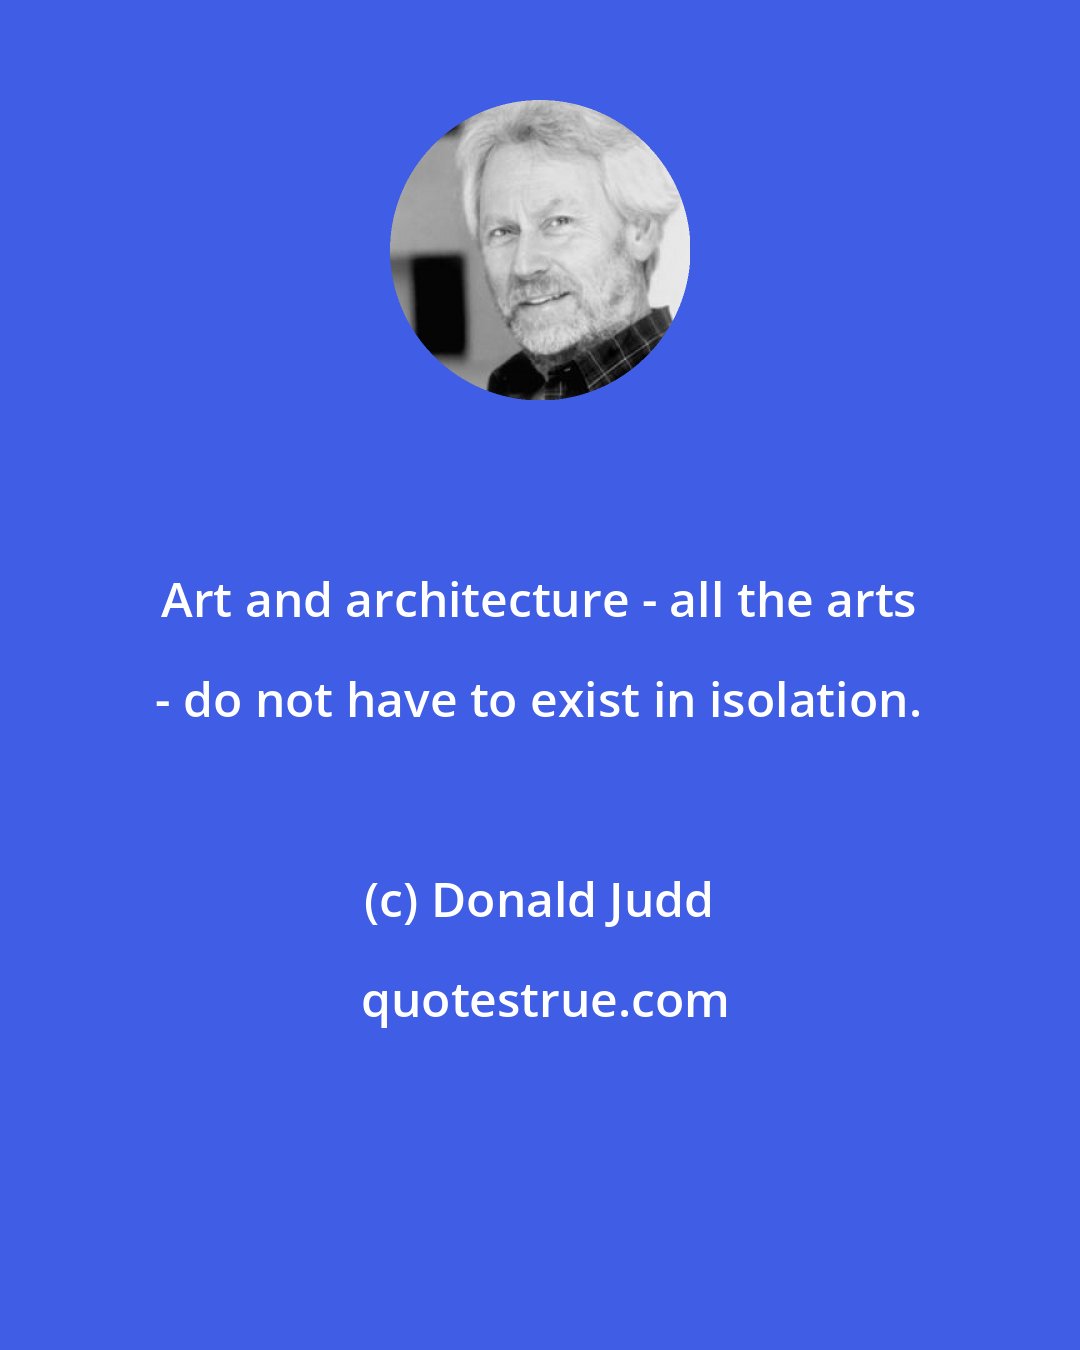 Donald Judd: Art and architecture - all the arts - do not have to exist in isolation.